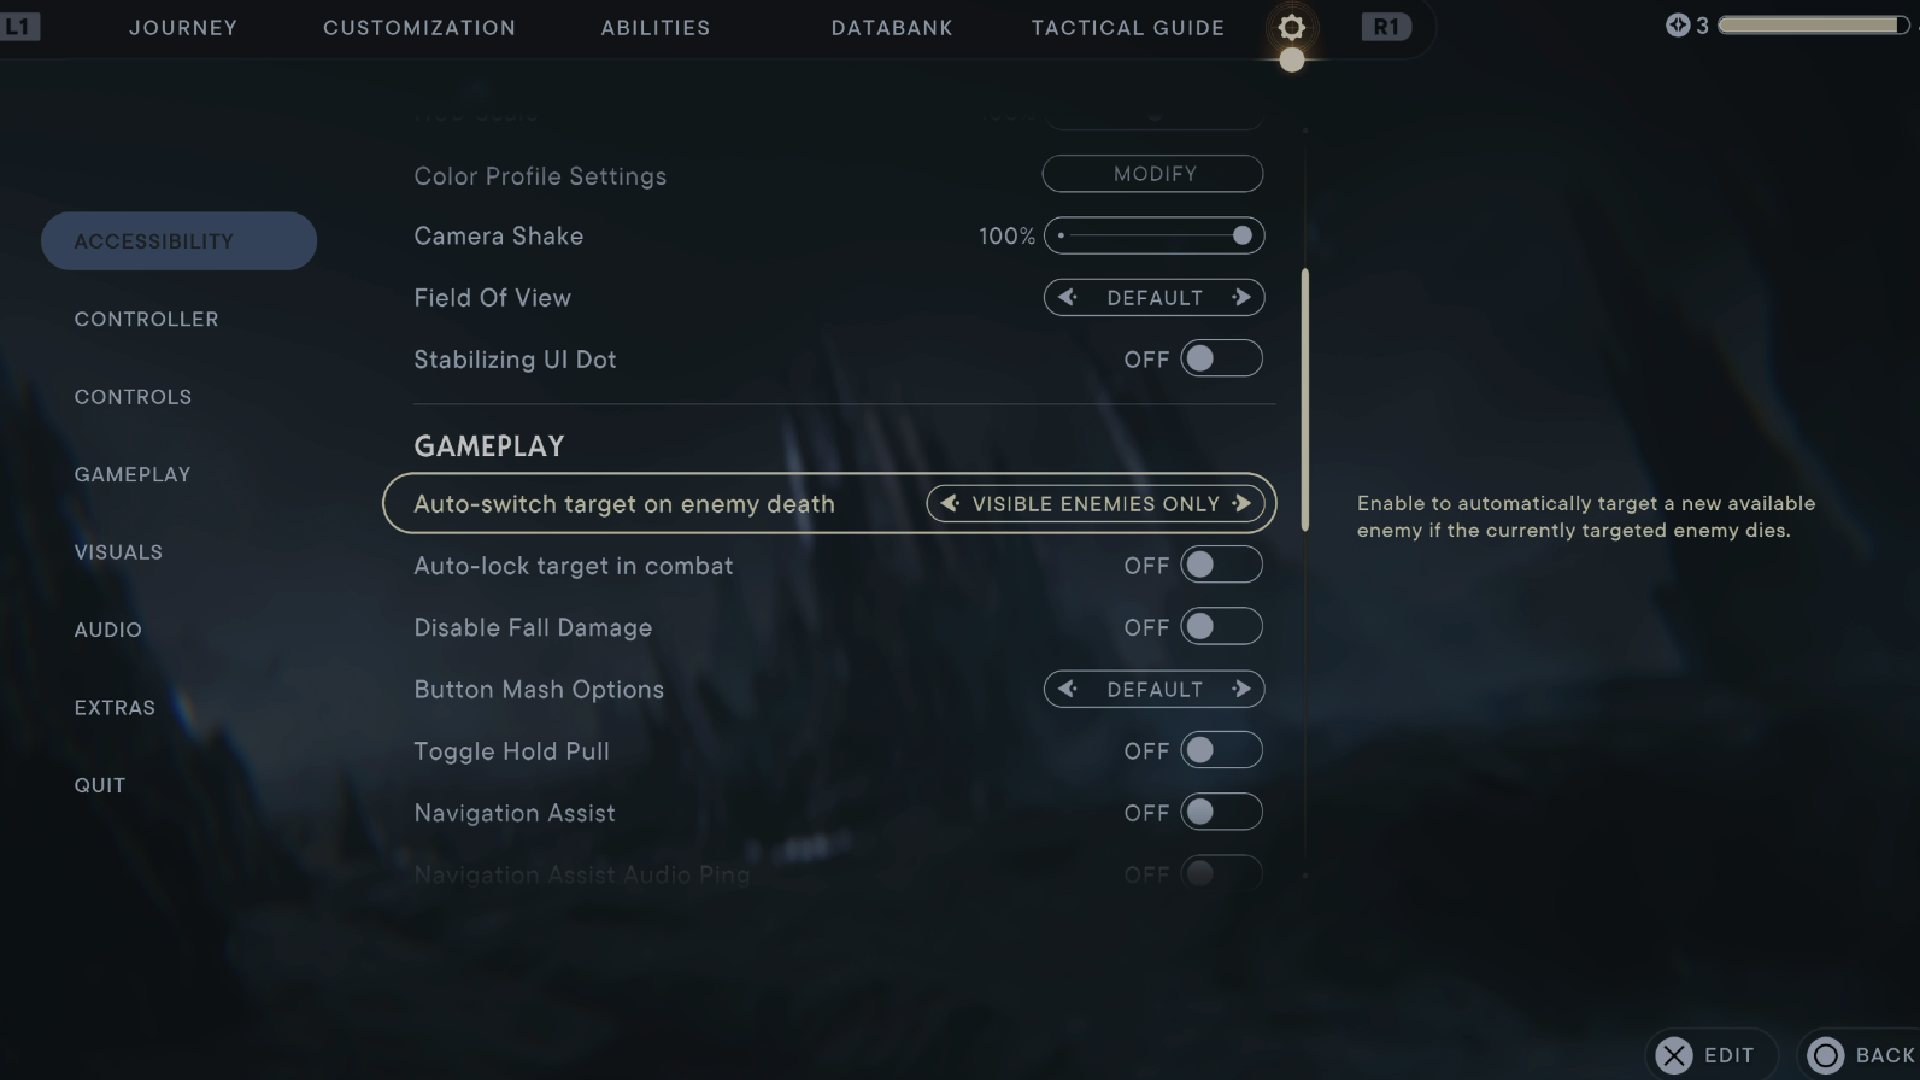 Star Wars Jedi Survivor Spiders: The option in the menu can be seen